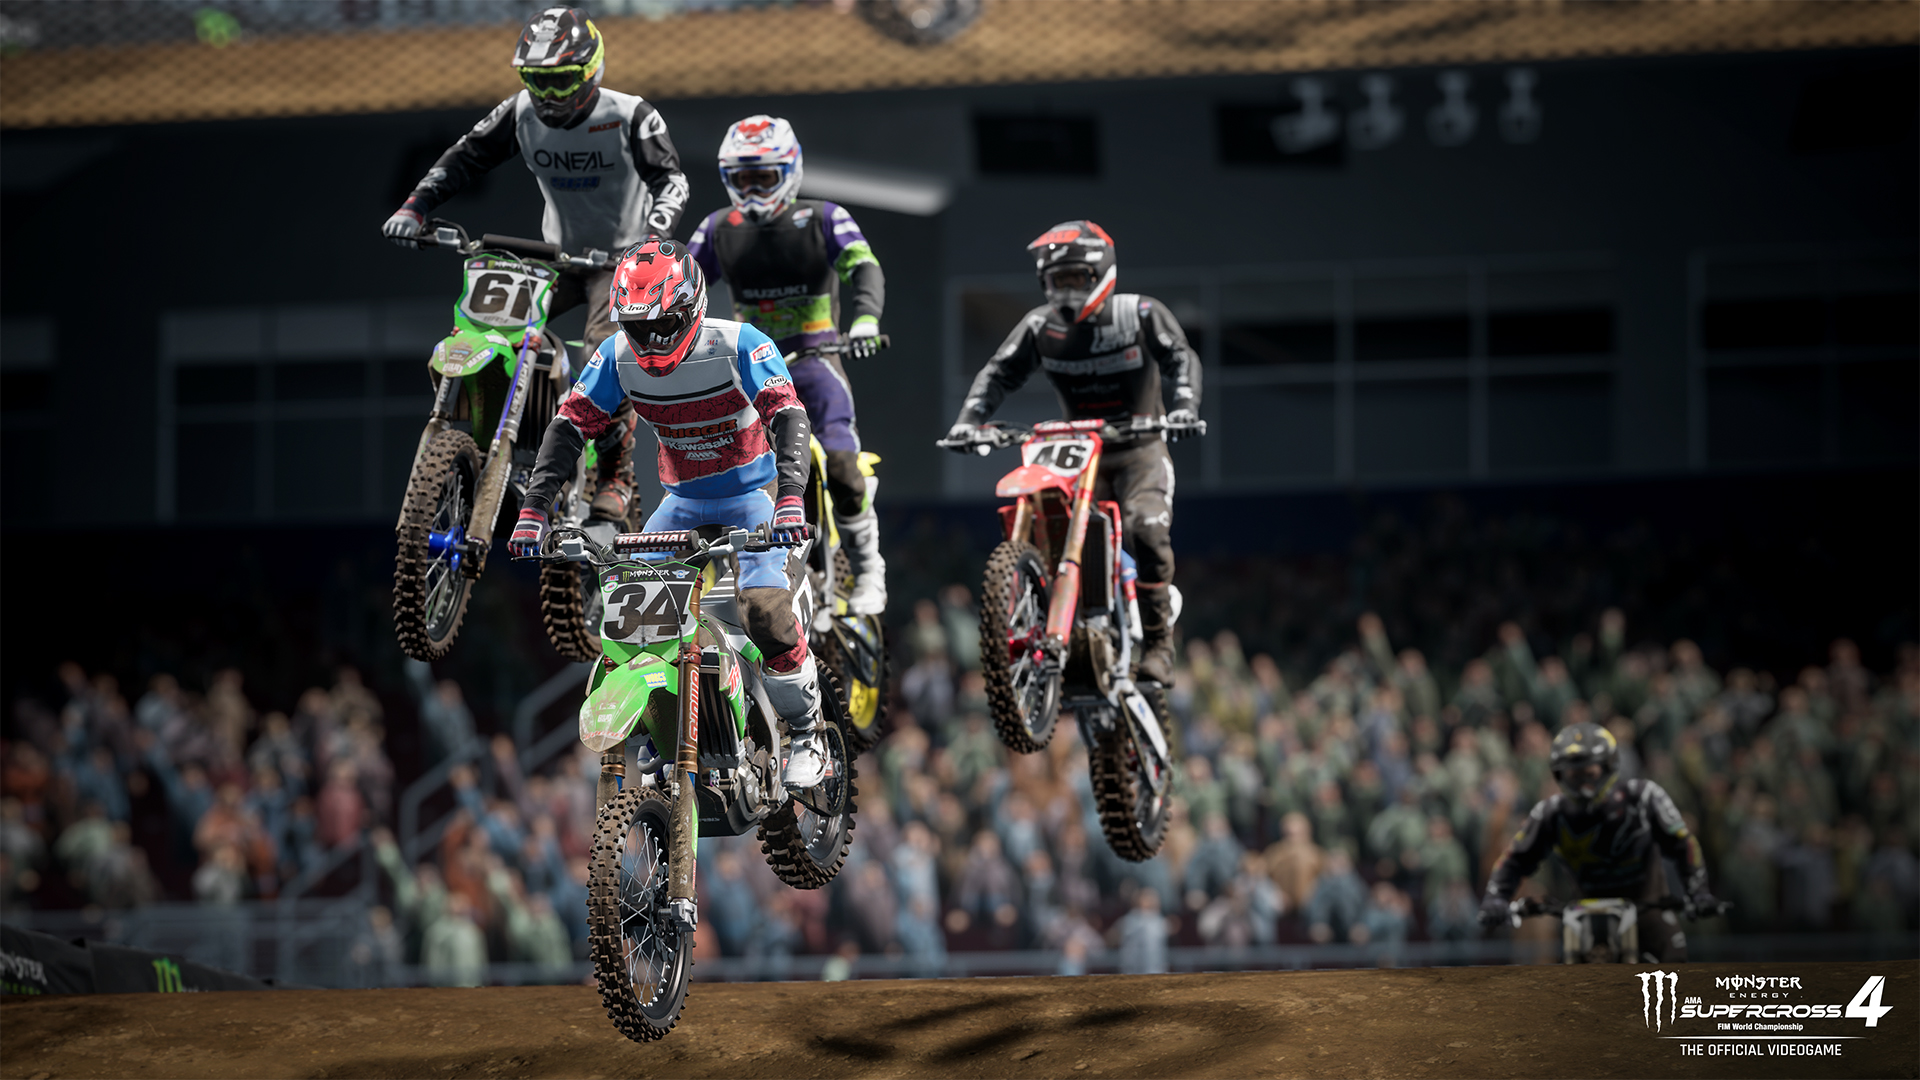 Monster Energy Supercross - The Videogame 4 Trailer, Screenshots & Details - Release Date Set March Operation Sports